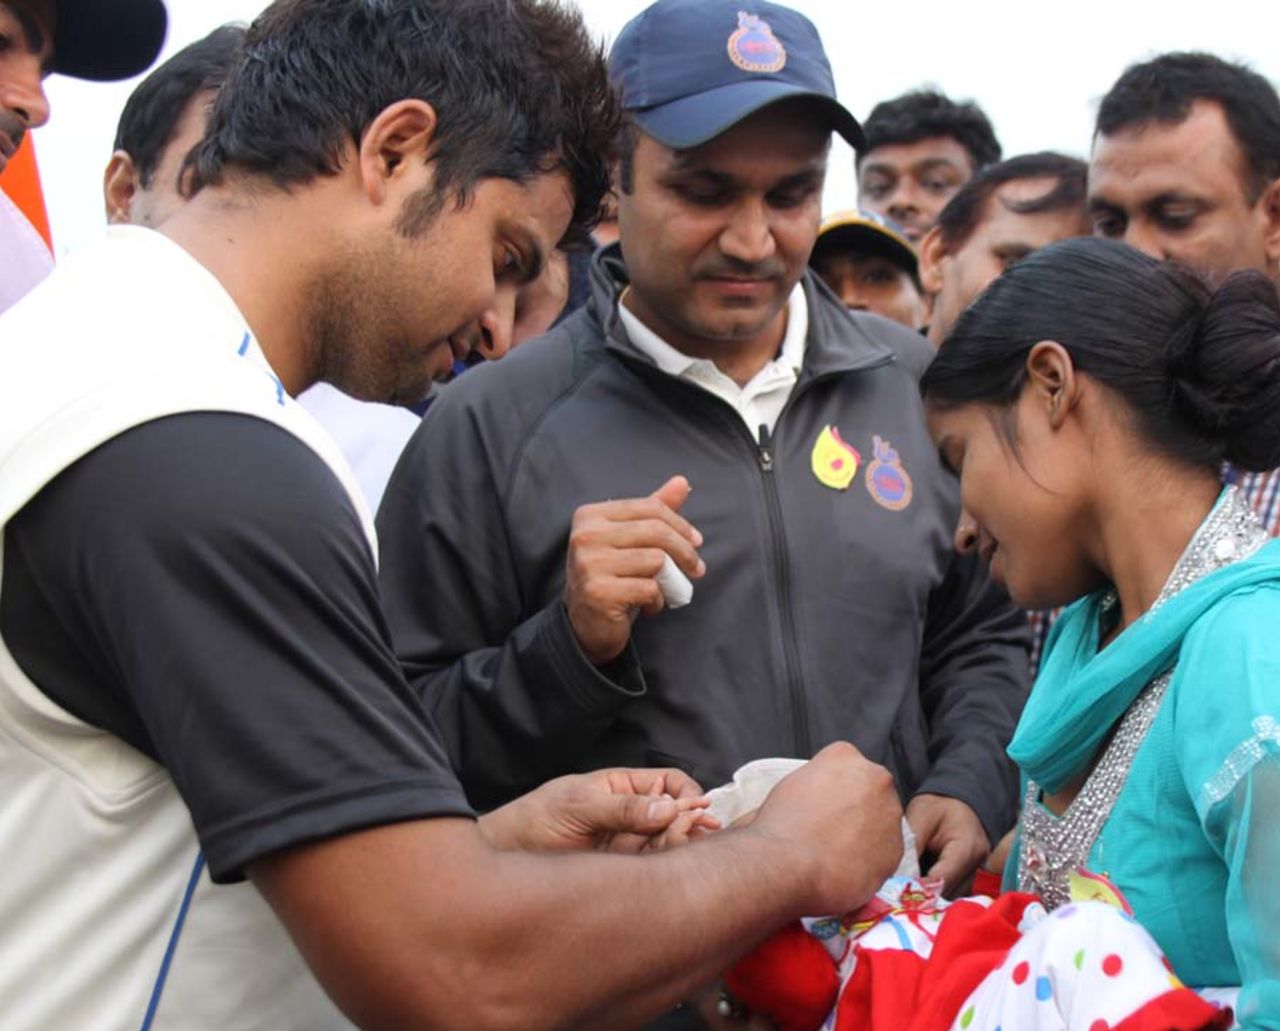 Suresh Raina and Virender Sehwag at a 'Bowl out Polio' event in Ghaziabad, November 4, 2012